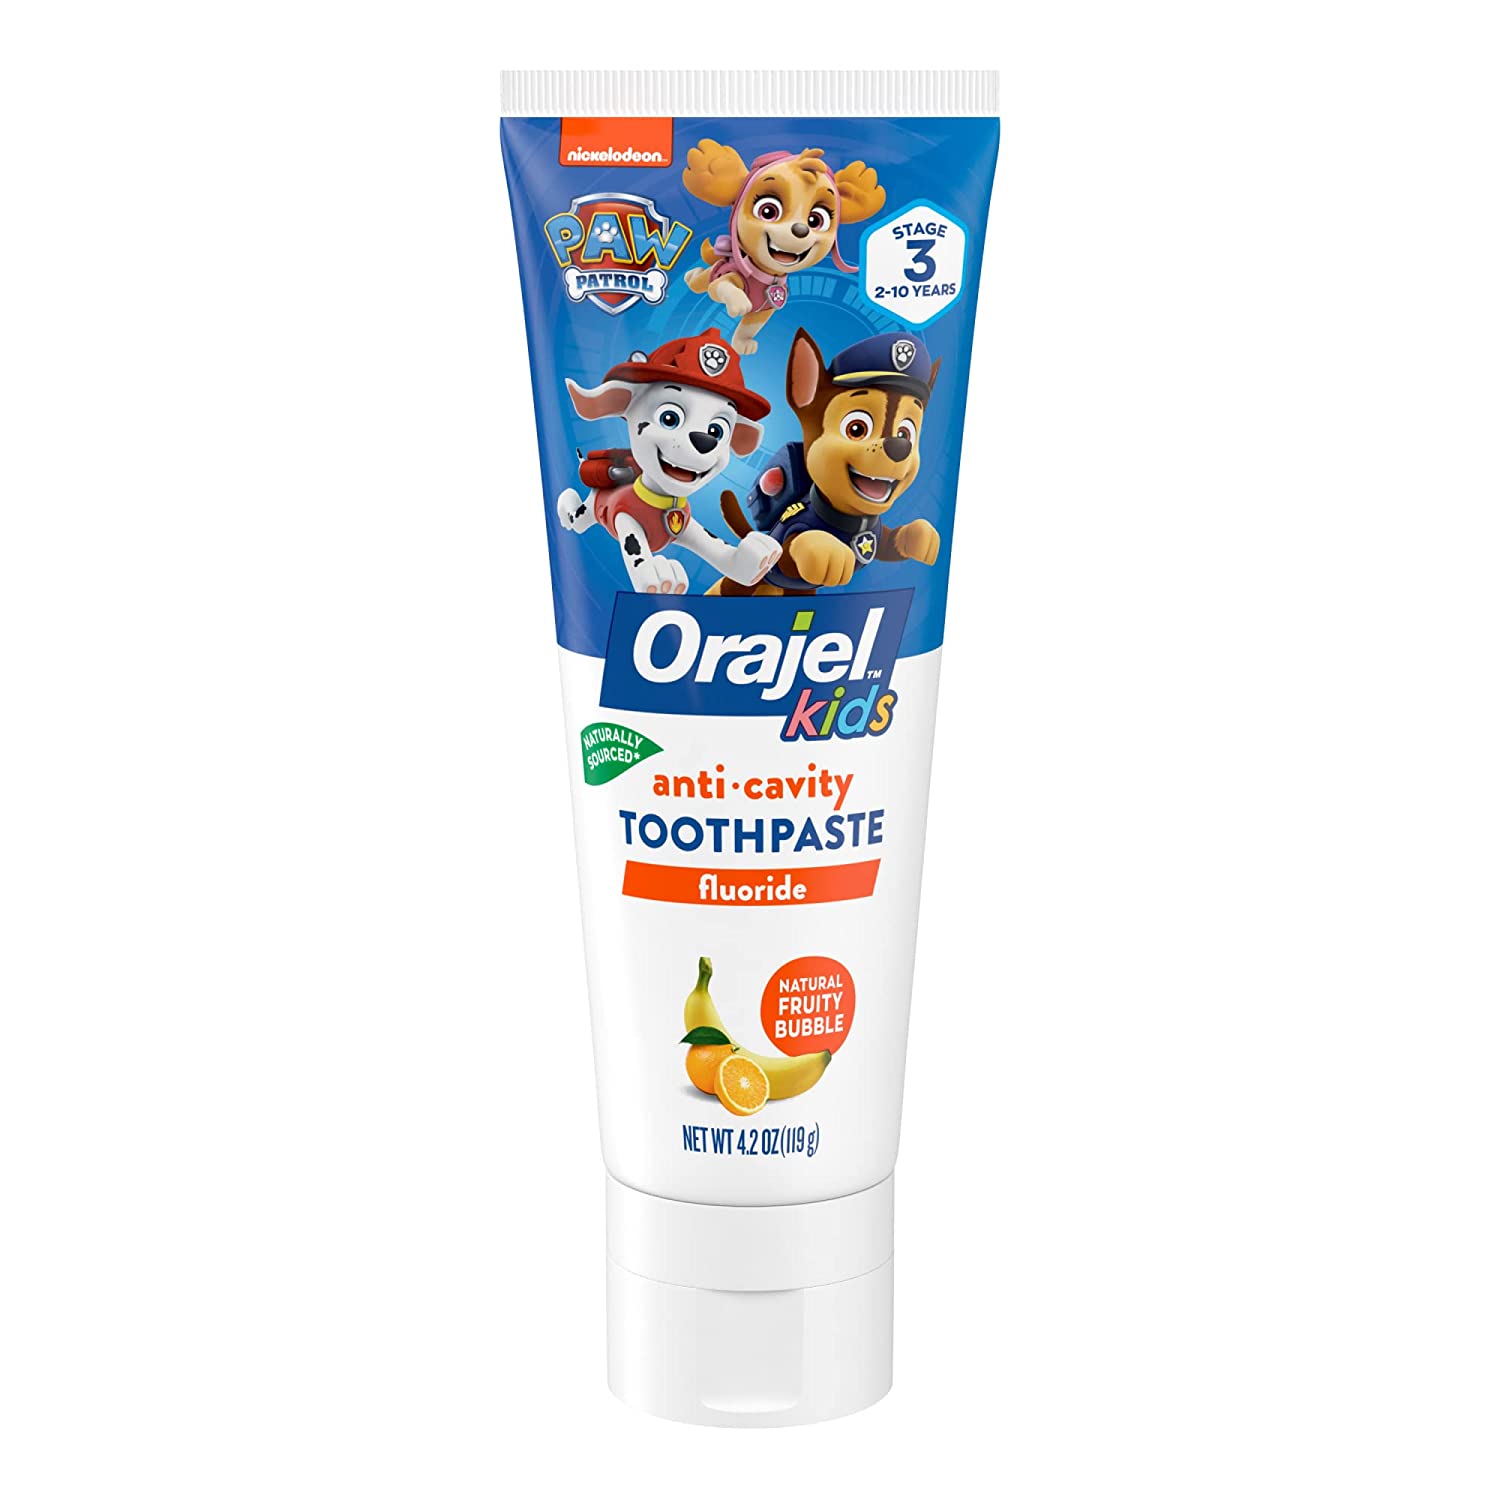 4.2-Oz Orajel Kids Paw Patrol Anti-Cavity Fluoride Toothpaste (Fruity Bubble) $1.66 + Free Shipping w/ Prime or on orders over $25